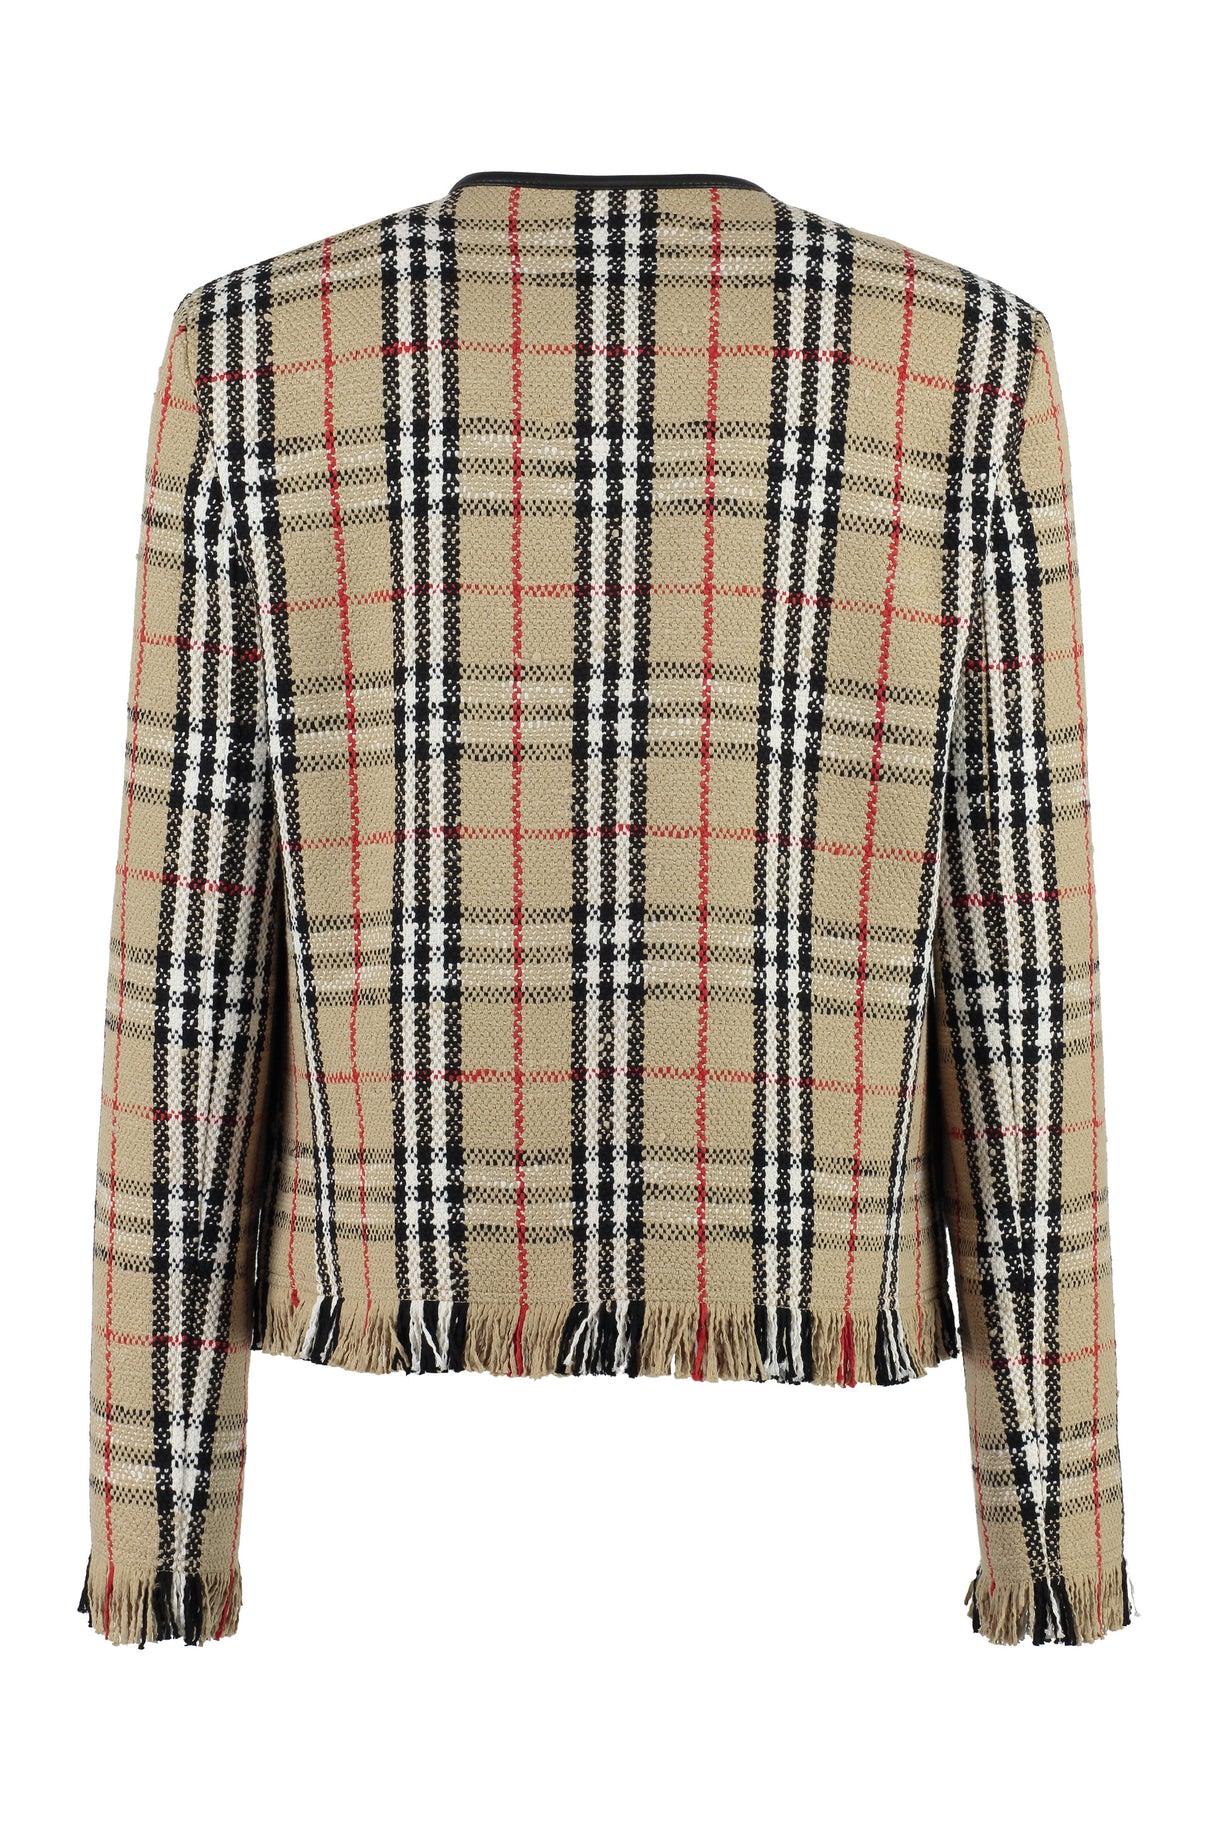 BURBERRY Beige Checkered Jacket with Leather Trim and Fringed Hemline